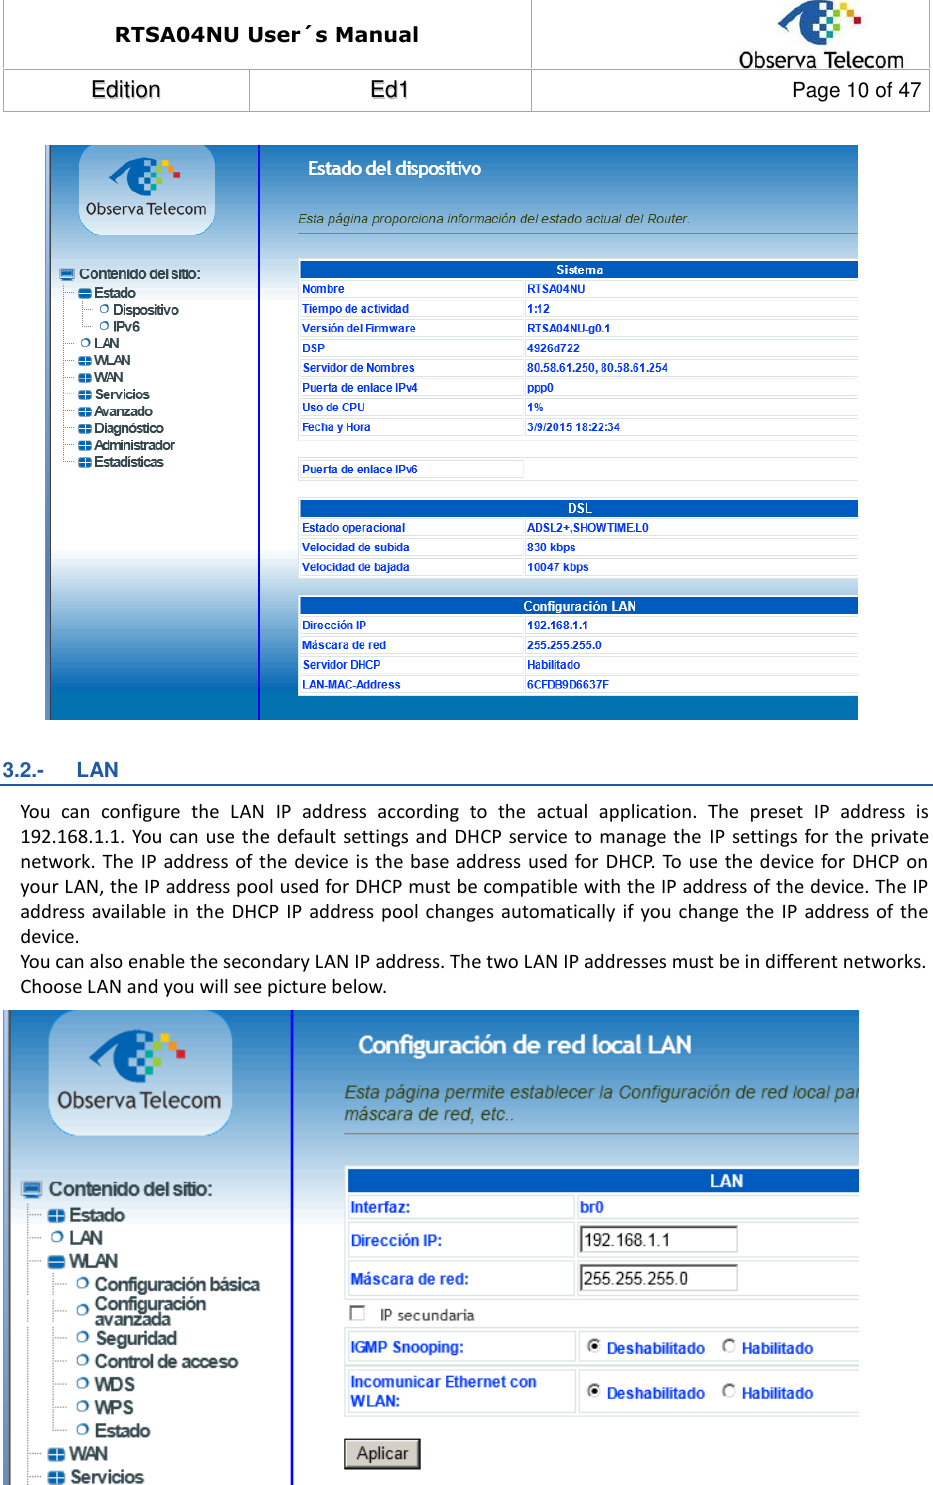 RTSA04NU User´s Manual  EEddiittiioonn  EEdd11  Page 10 of 47                  3.2.-   LAN You  can  configure  the  LAN  IP  address  according  to  the  actual  application.  The  preset  IP  address  is 192.168.1.1. You  can use the  default  settings and DHCP service  to manage the  IP settings  for  the private network. The IP address of  the device is the base  address used for DHCP. To use  the device  for DHCP  on your LAN, the IP address pool used for DHCP must be compatible with the IP address of the device. The IP address available  in the  DHCP IP address pool changes automatically  if you  change the  IP address  of  the device. You can also enable the secondary LAN IP address. The two LAN IP addresses must be in different networks. Choose LAN and you will see picture below.     